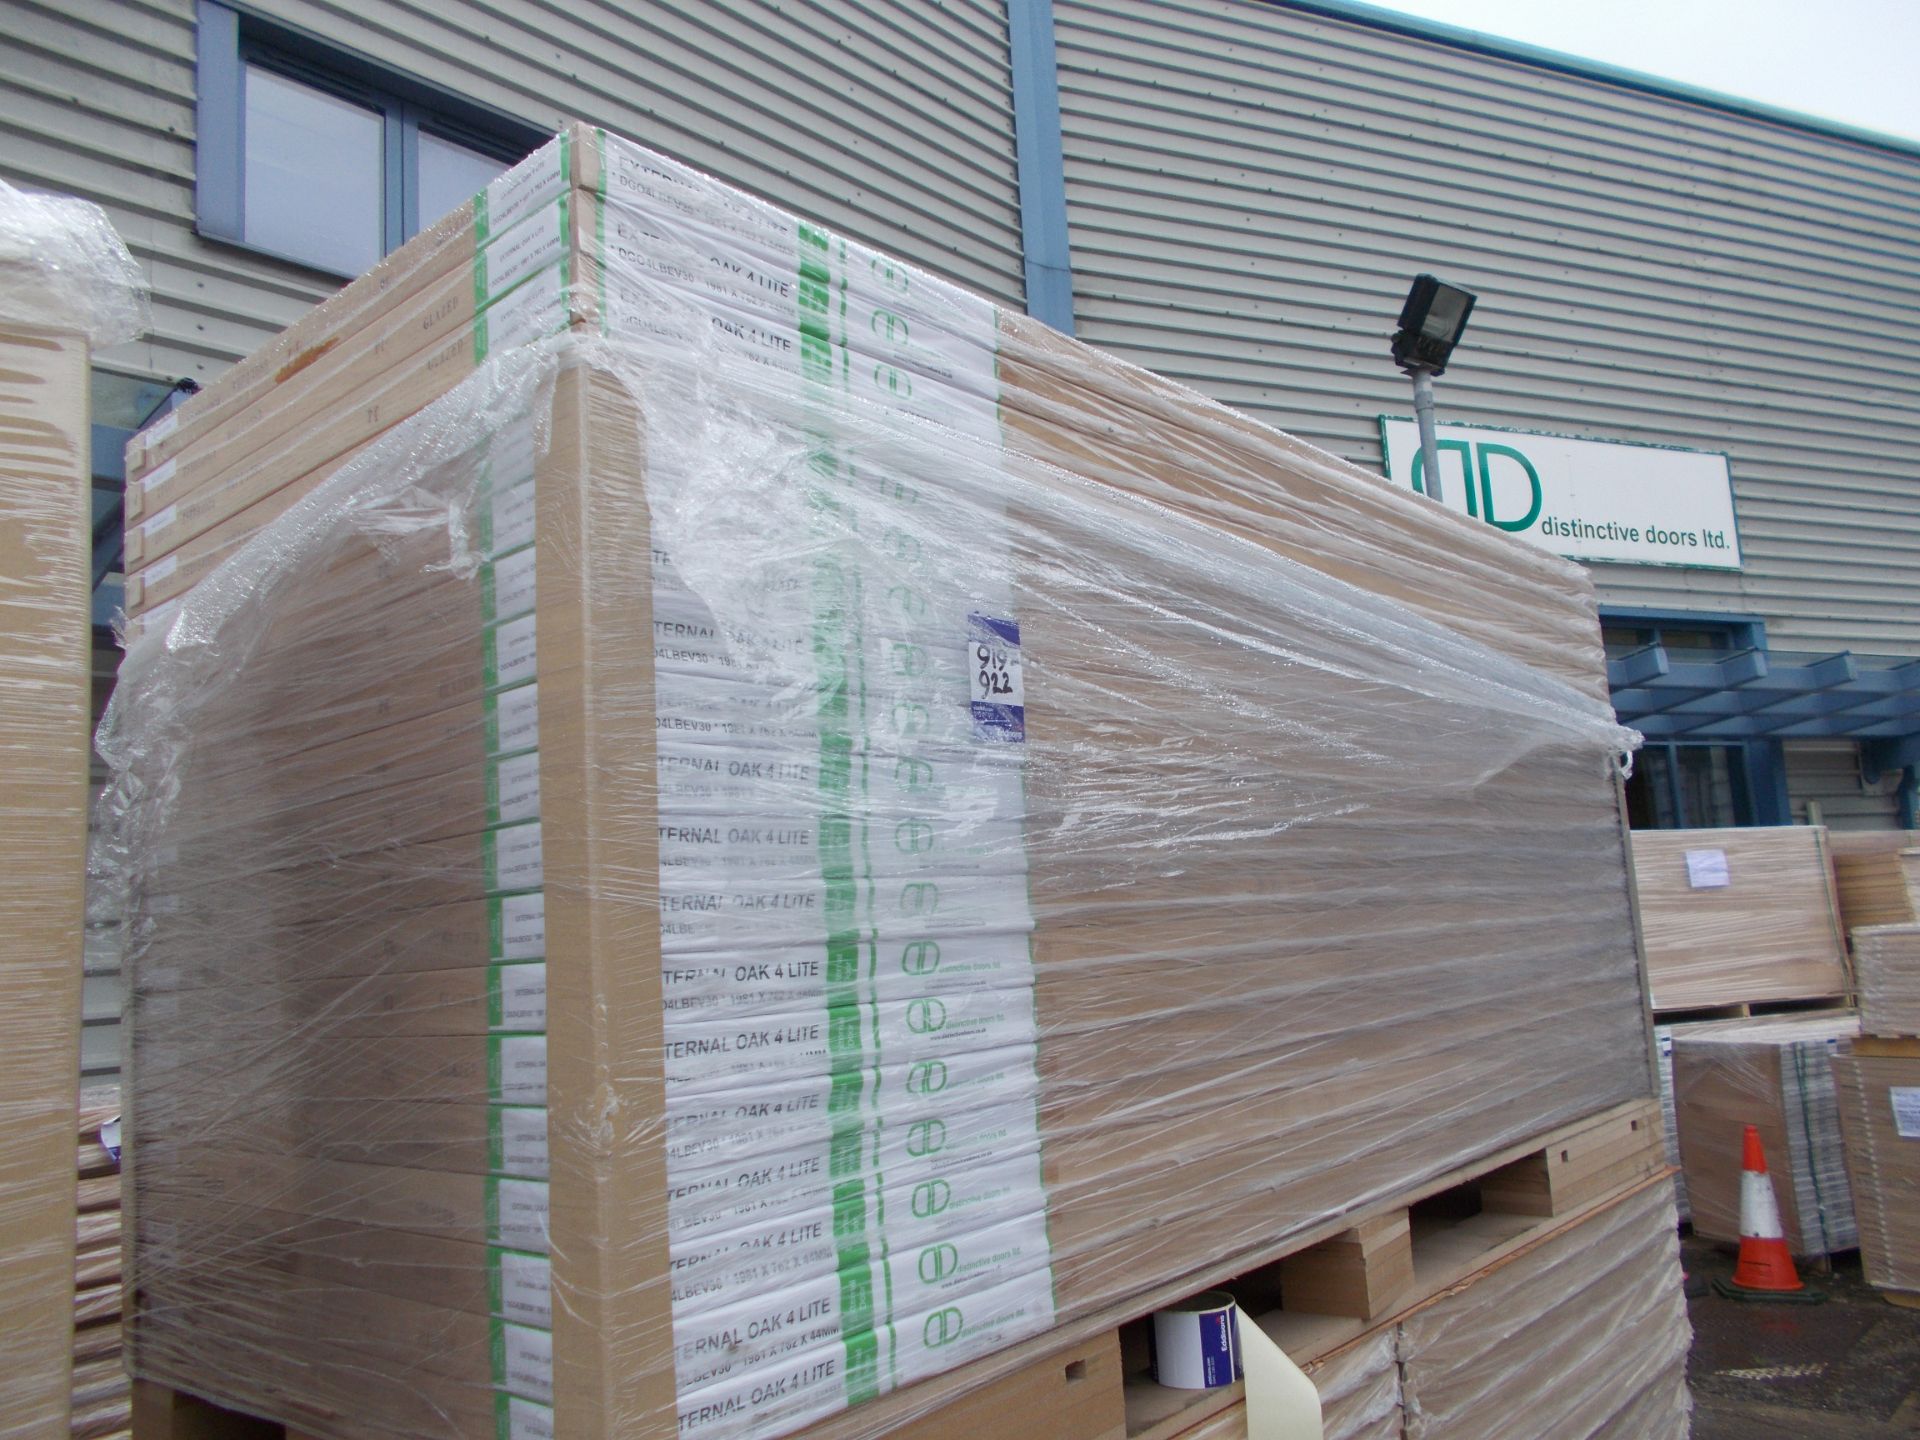 4 x External Oak 4 Lite DG04LBEV30 Ext Door 1981x762x44mm - Lots to be handed out in order they - Image 2 of 3